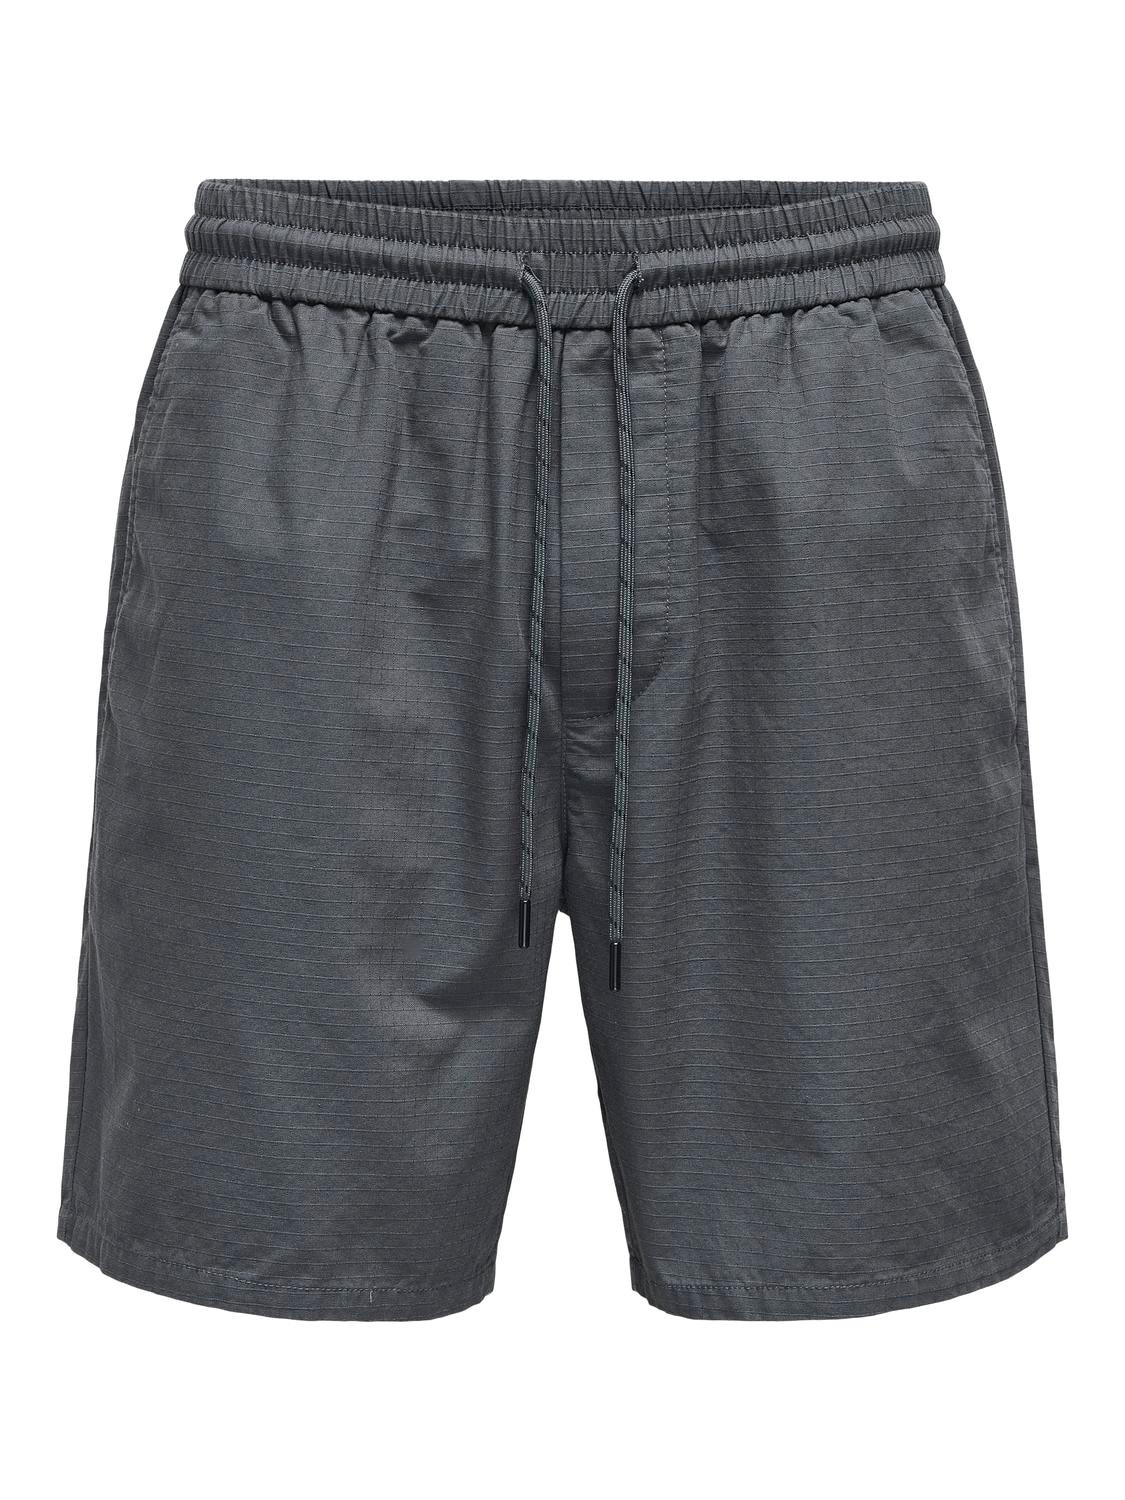 ONLY & SONS Regular Fit Shorts -Grey Pinstripe - 22029691